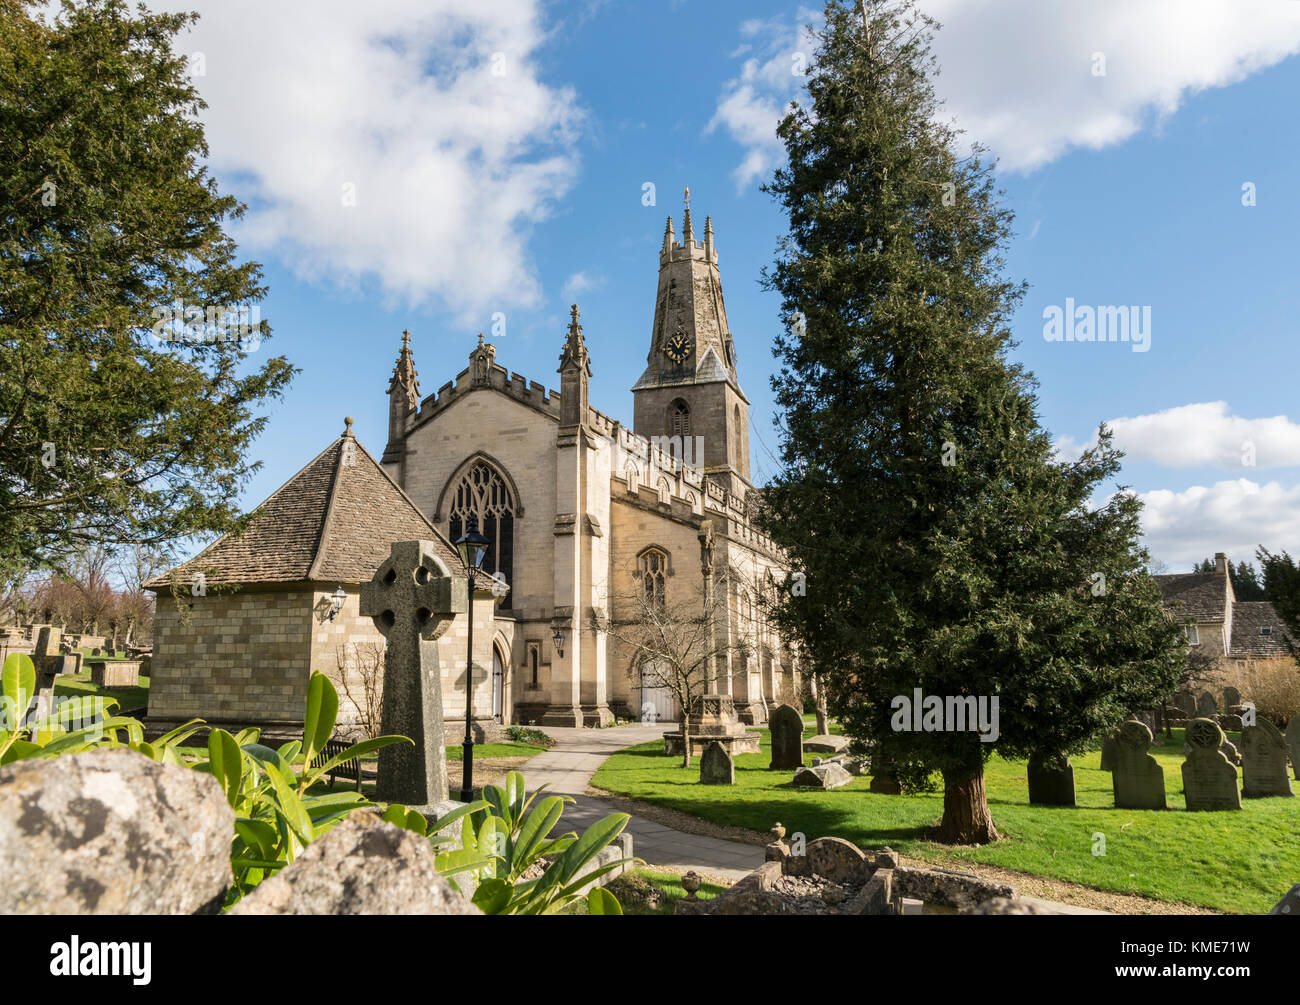 The parish church of The Holy Trinity in Minchinhampton, Gloucestershire, UK. Minchinhampton is an ancient market town in The Cotswolds, UK Stock Photo